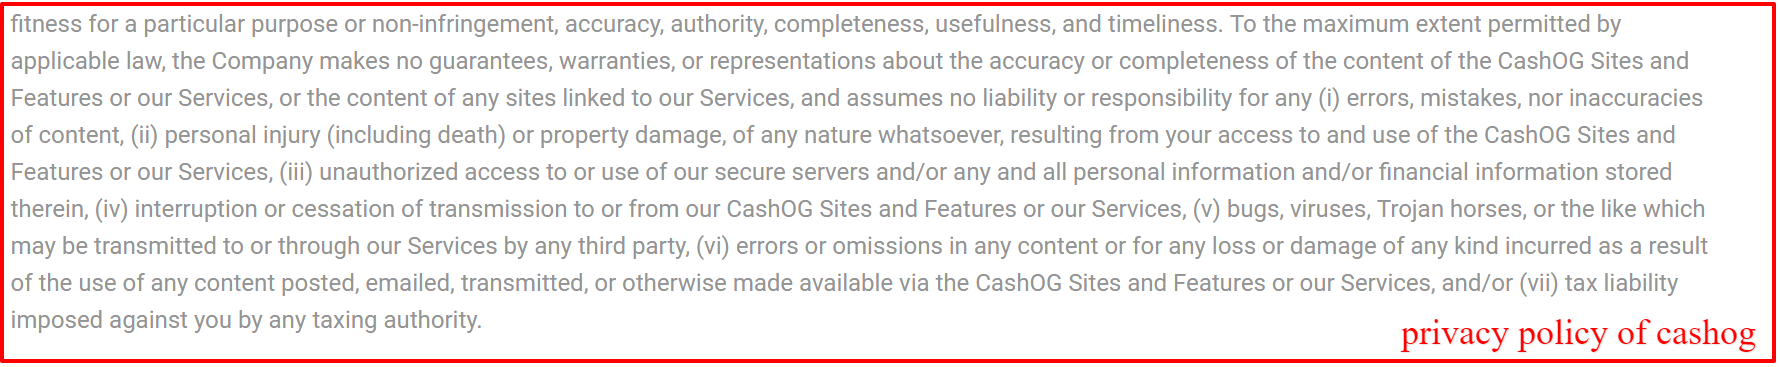 privacy policy of cashog